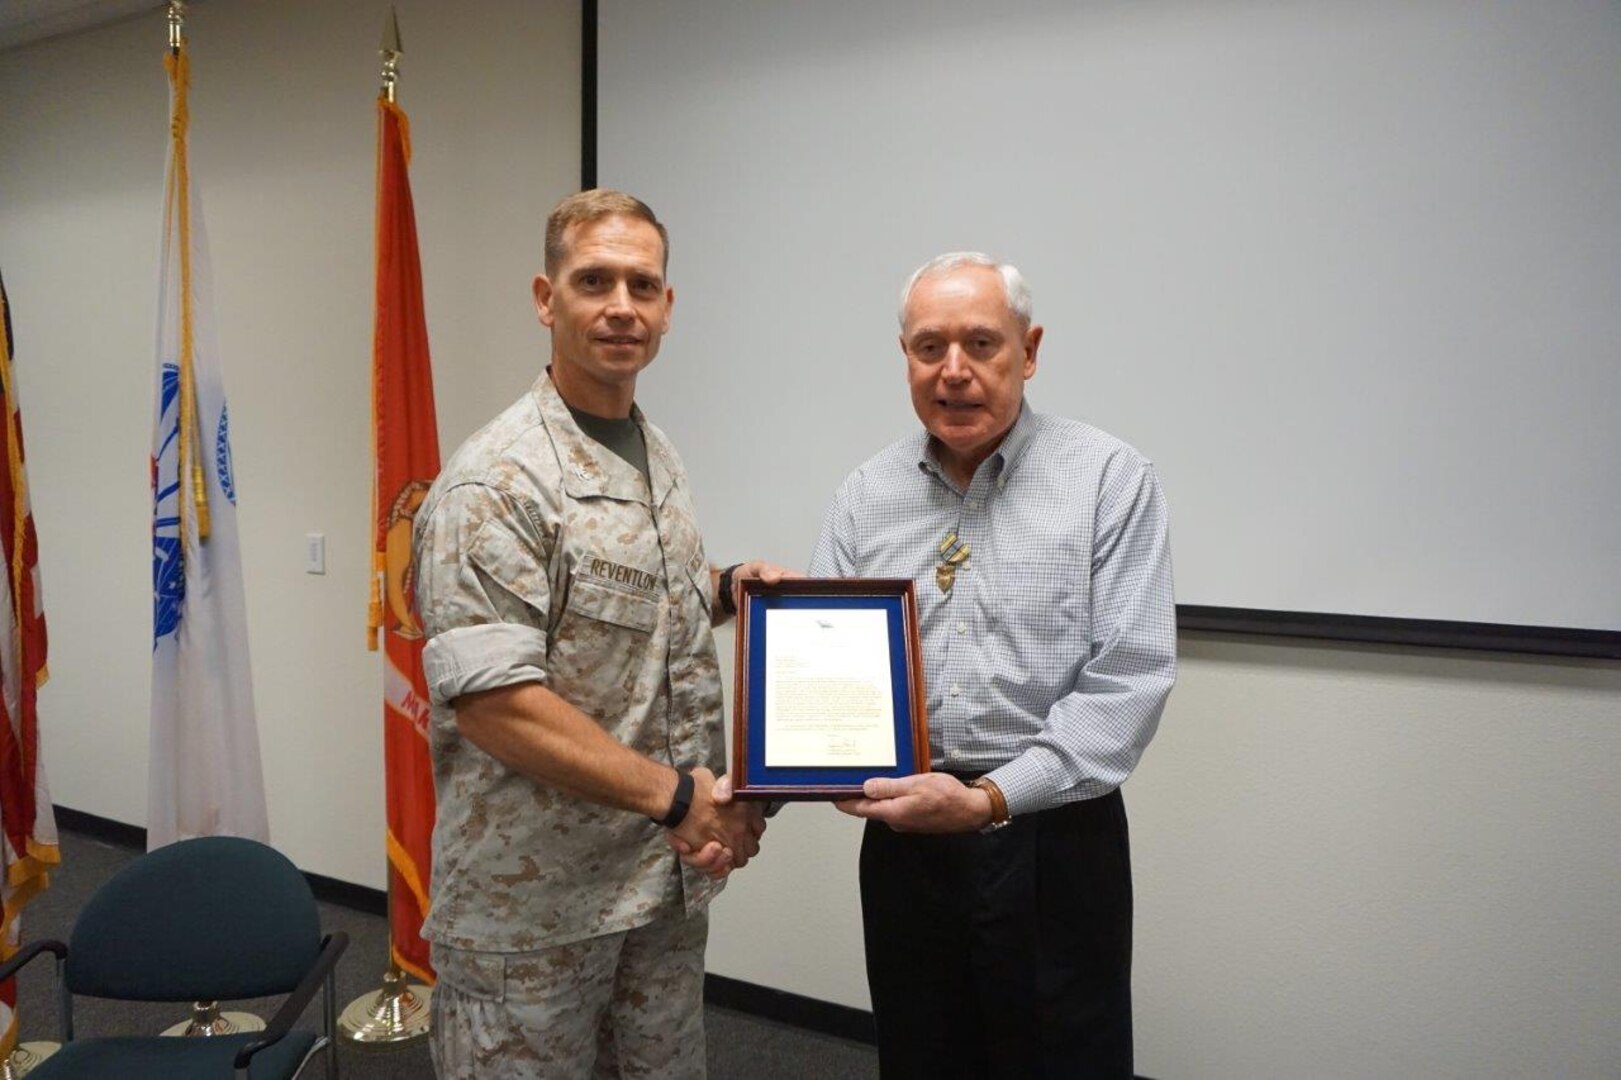 Paul Balash III, right, receives the DLA Exceptional Civilian Service Award from former DLA Distribution San Joaquin, Calif., commander Marine Col. Keith Reventlow prior to retiring.